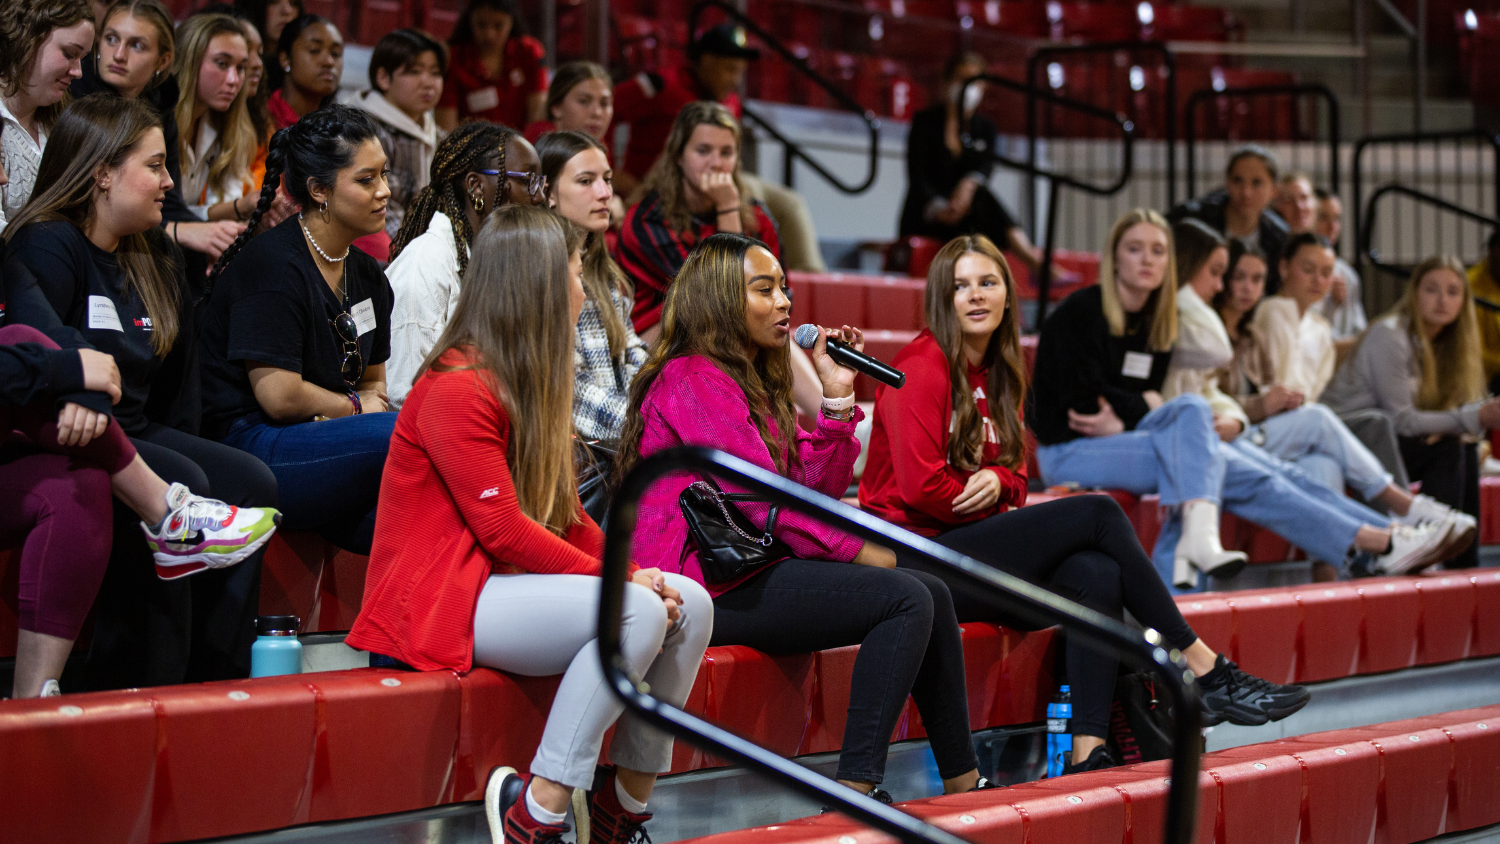 student in audience asks question - Women in Sport Leadership Summit Empowers Female Athletes and Students - College of Natural Resources News NC State University